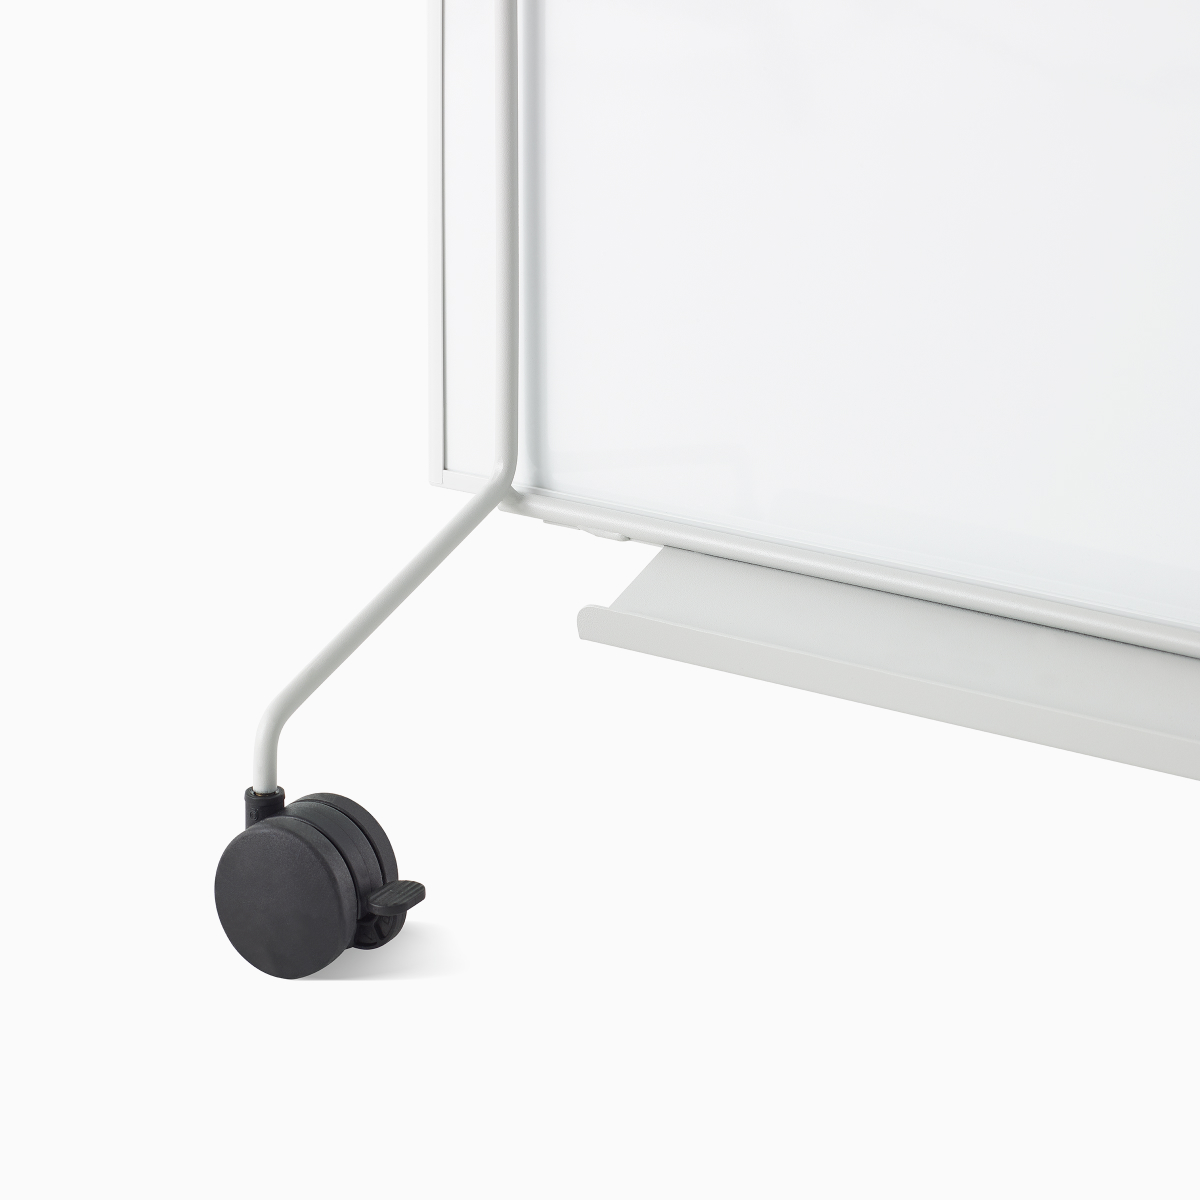 Close up image of a grey OE1 Mobile Easel with black casters and white marker board, viewed from an angle.